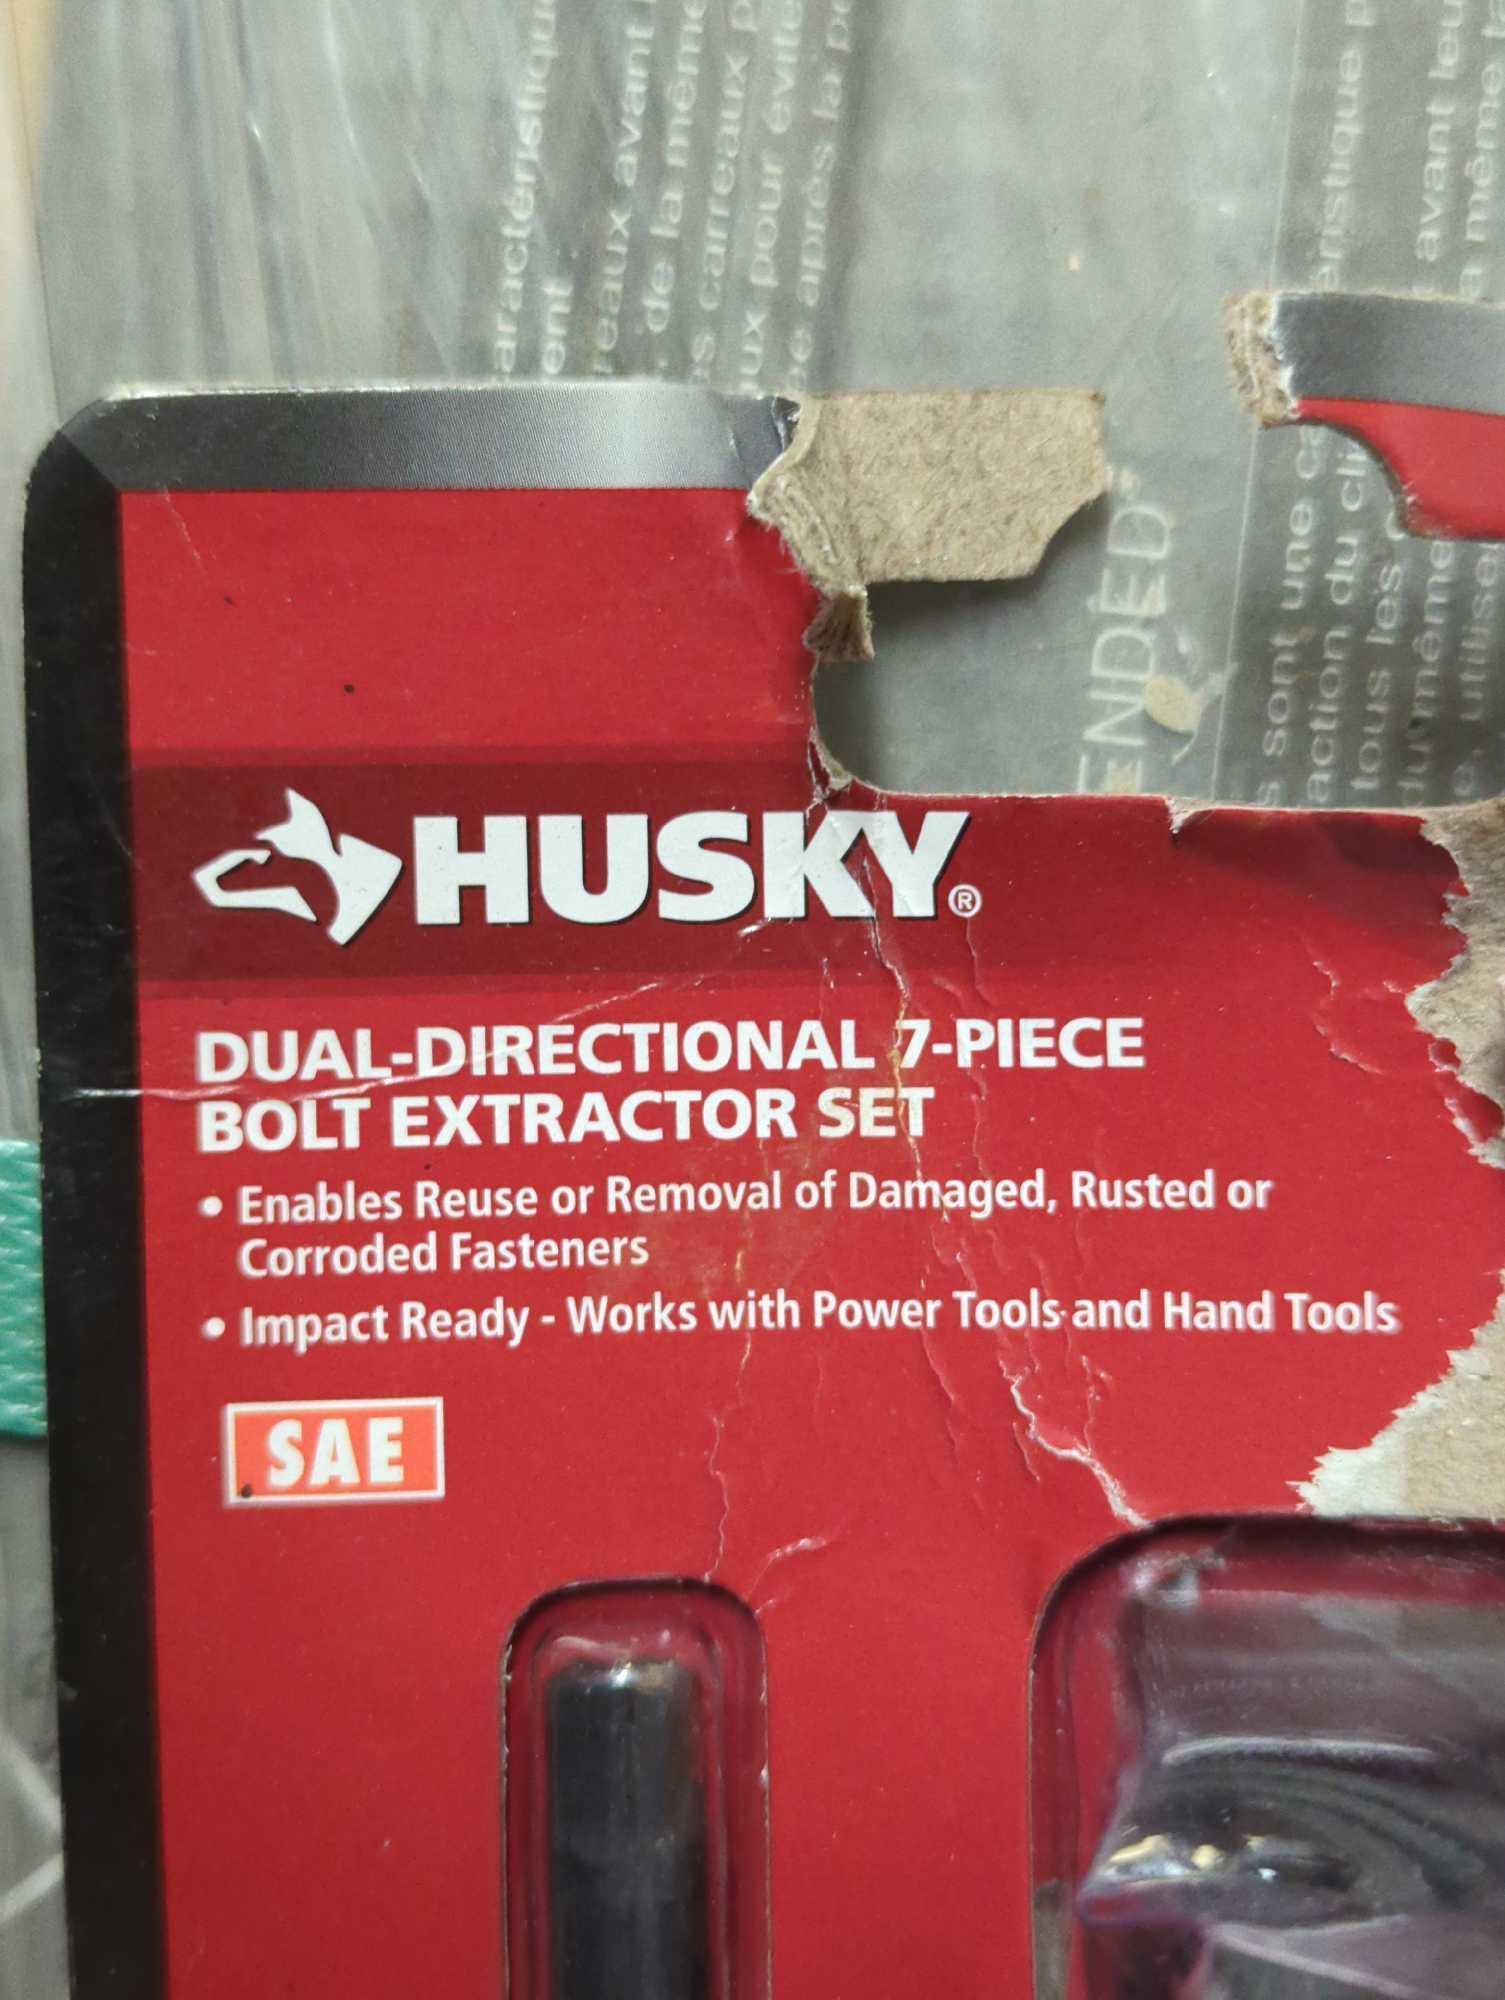 Husky SAE Dual Direction Extraction Set (7-Piece), Appears to be New in Open Package, Do to Being In